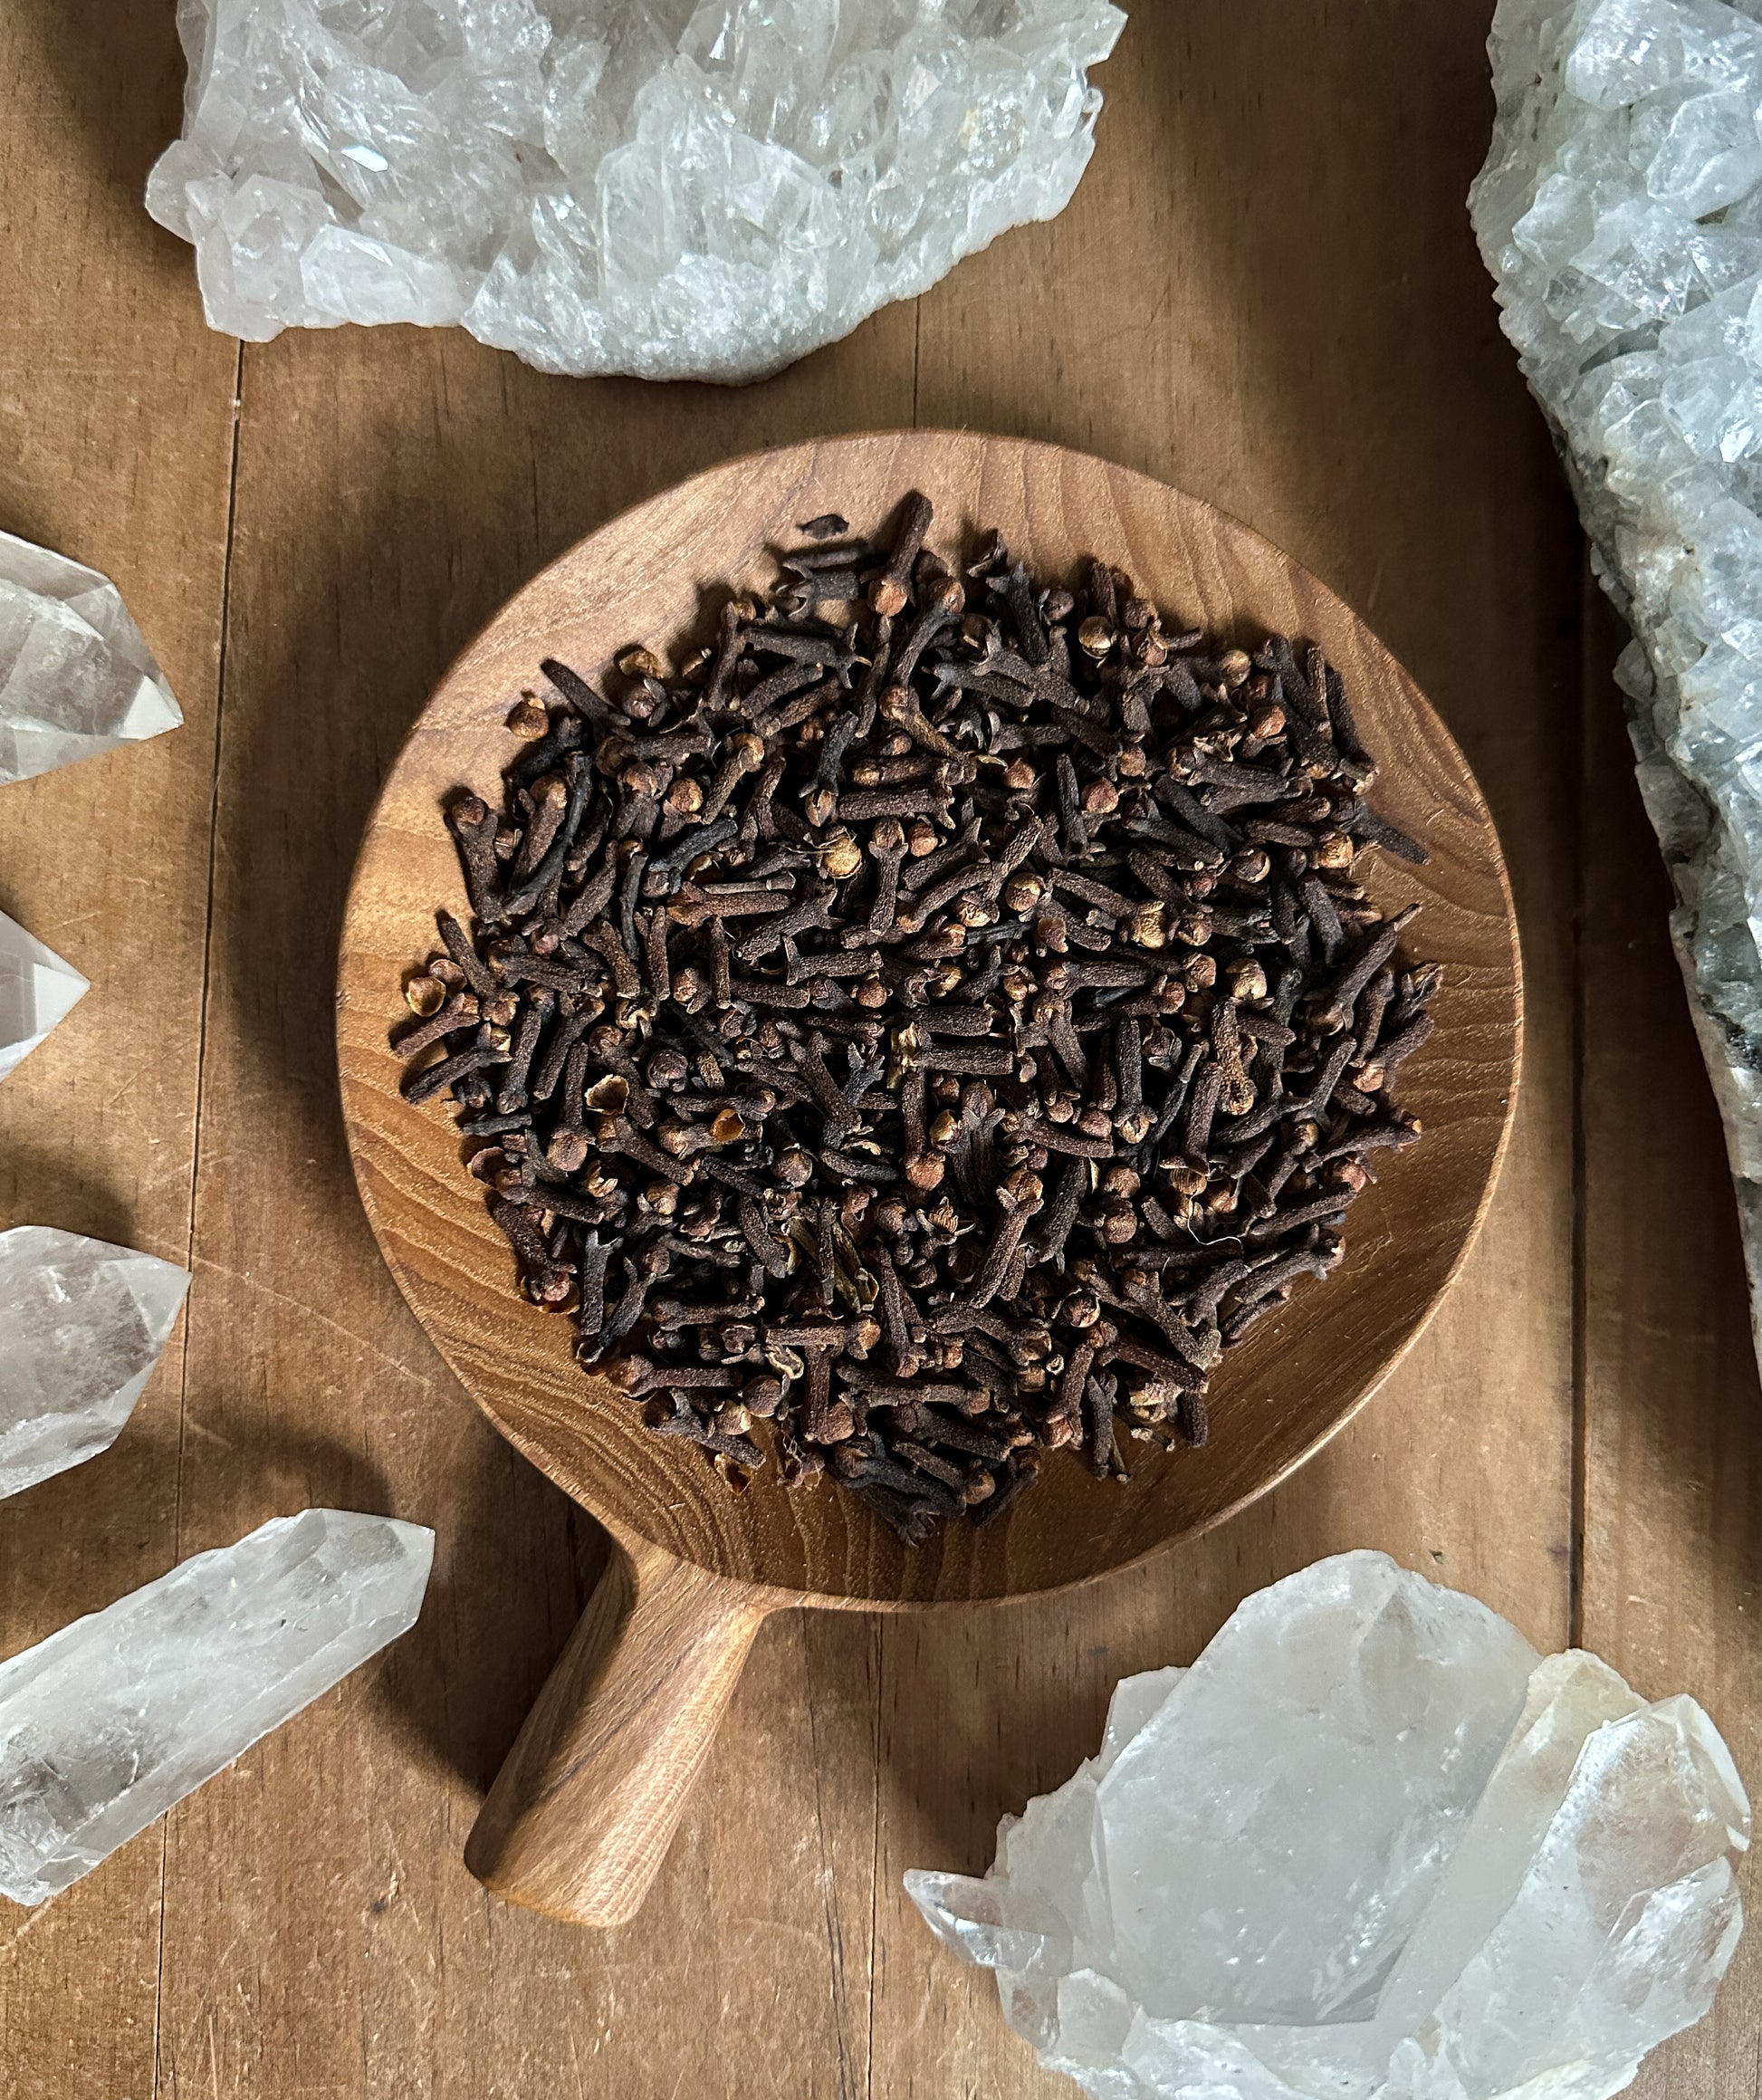 Clove is often associated with Protection, Prosperity, Love, Purification, Healing, Abundance, Clarity, and Spiritual growth.